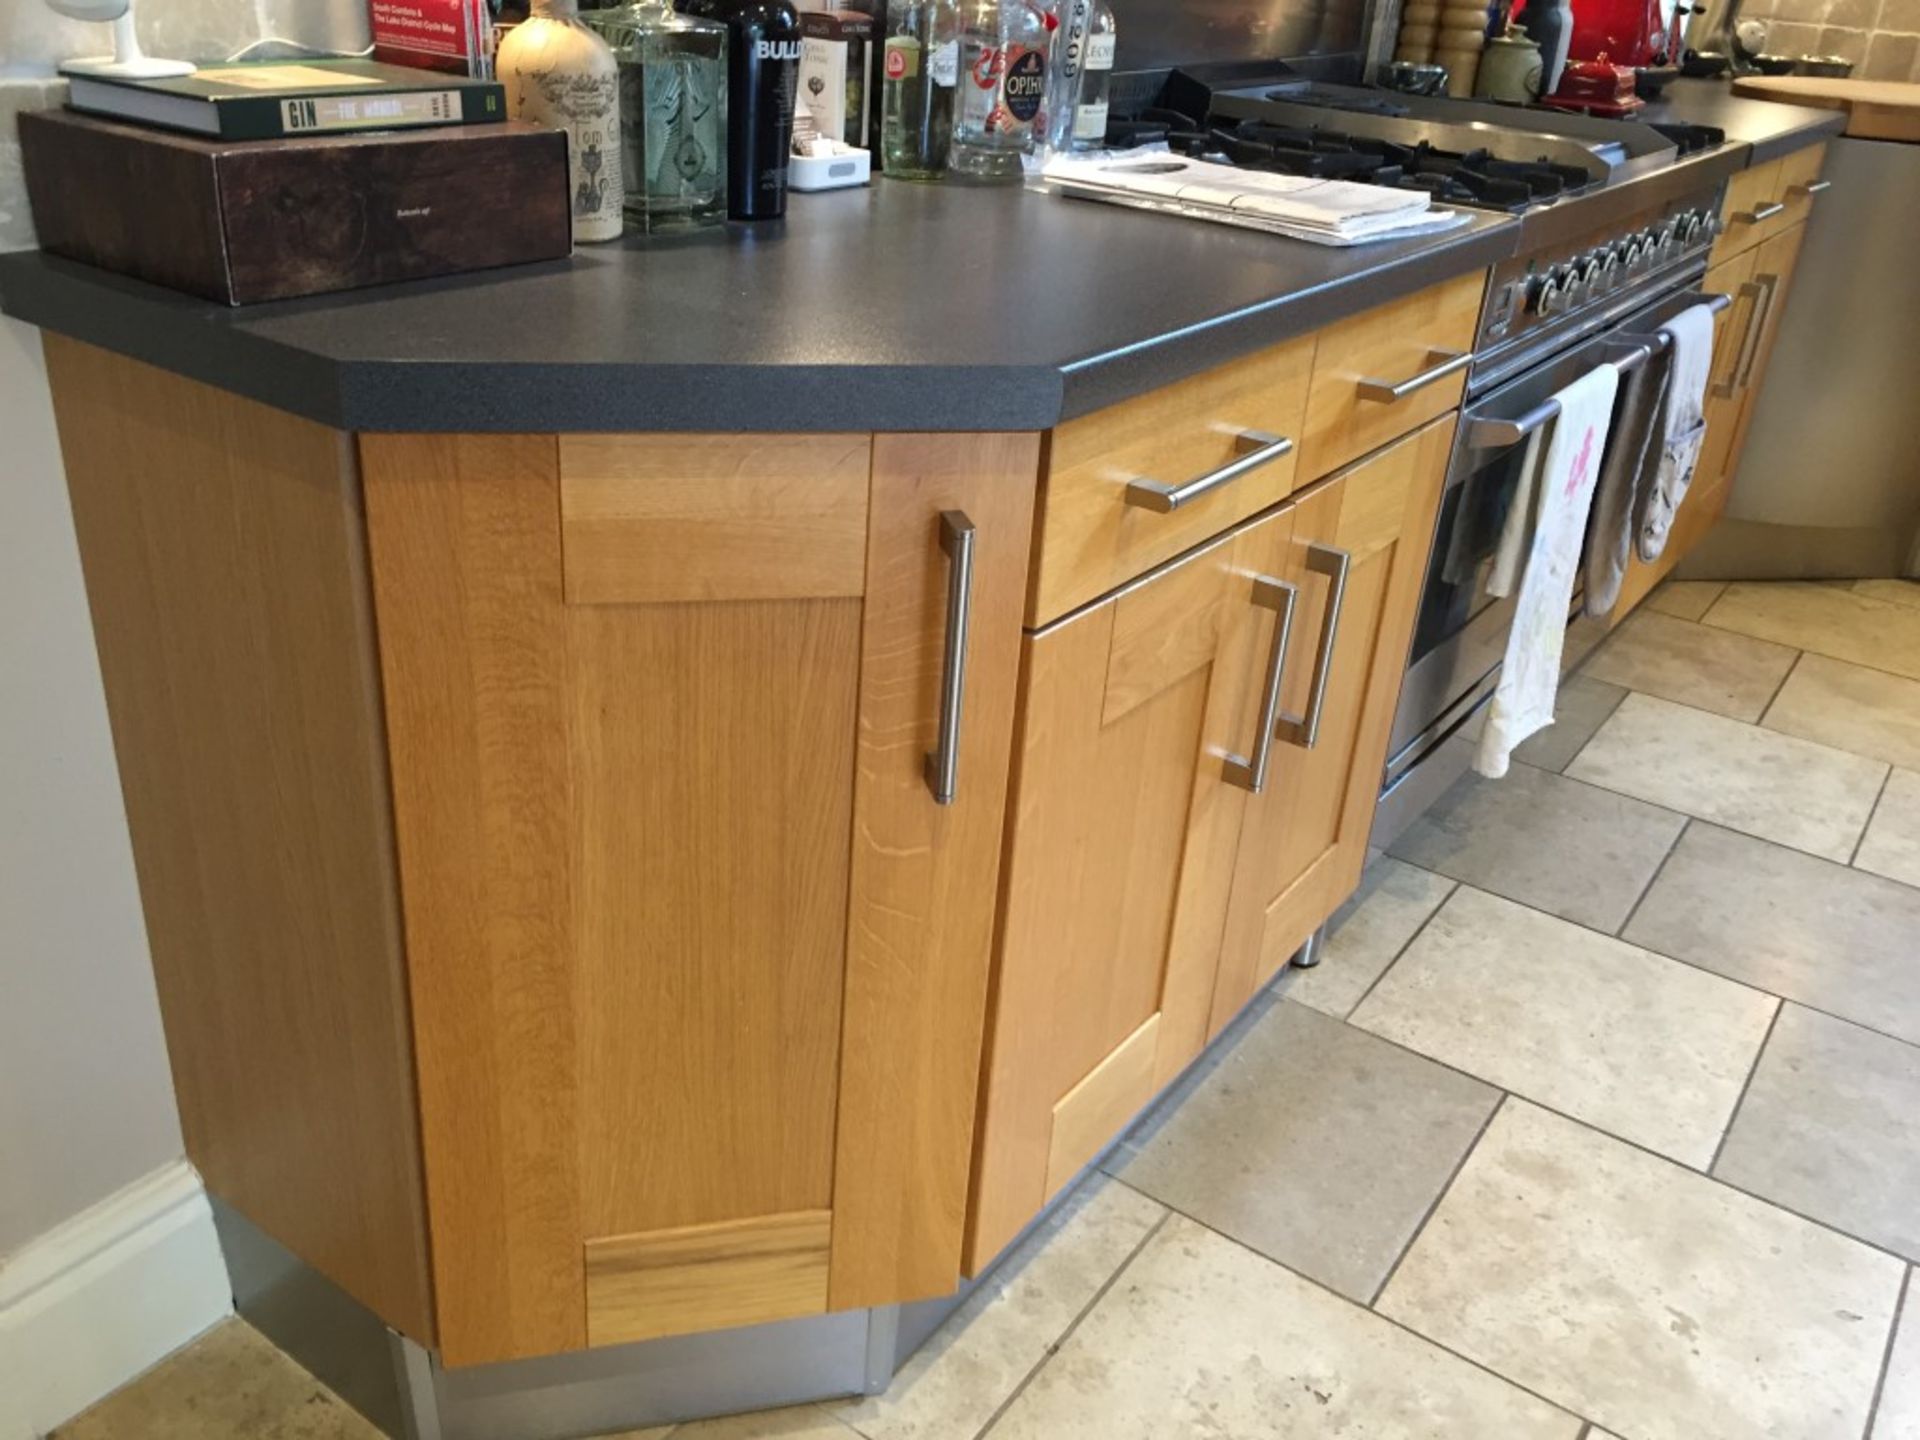 1 x Solid Wood Kitchen By English Rose With Breakfast Bar/Central Island Unit, Laminate Worktops And - Image 4 of 40